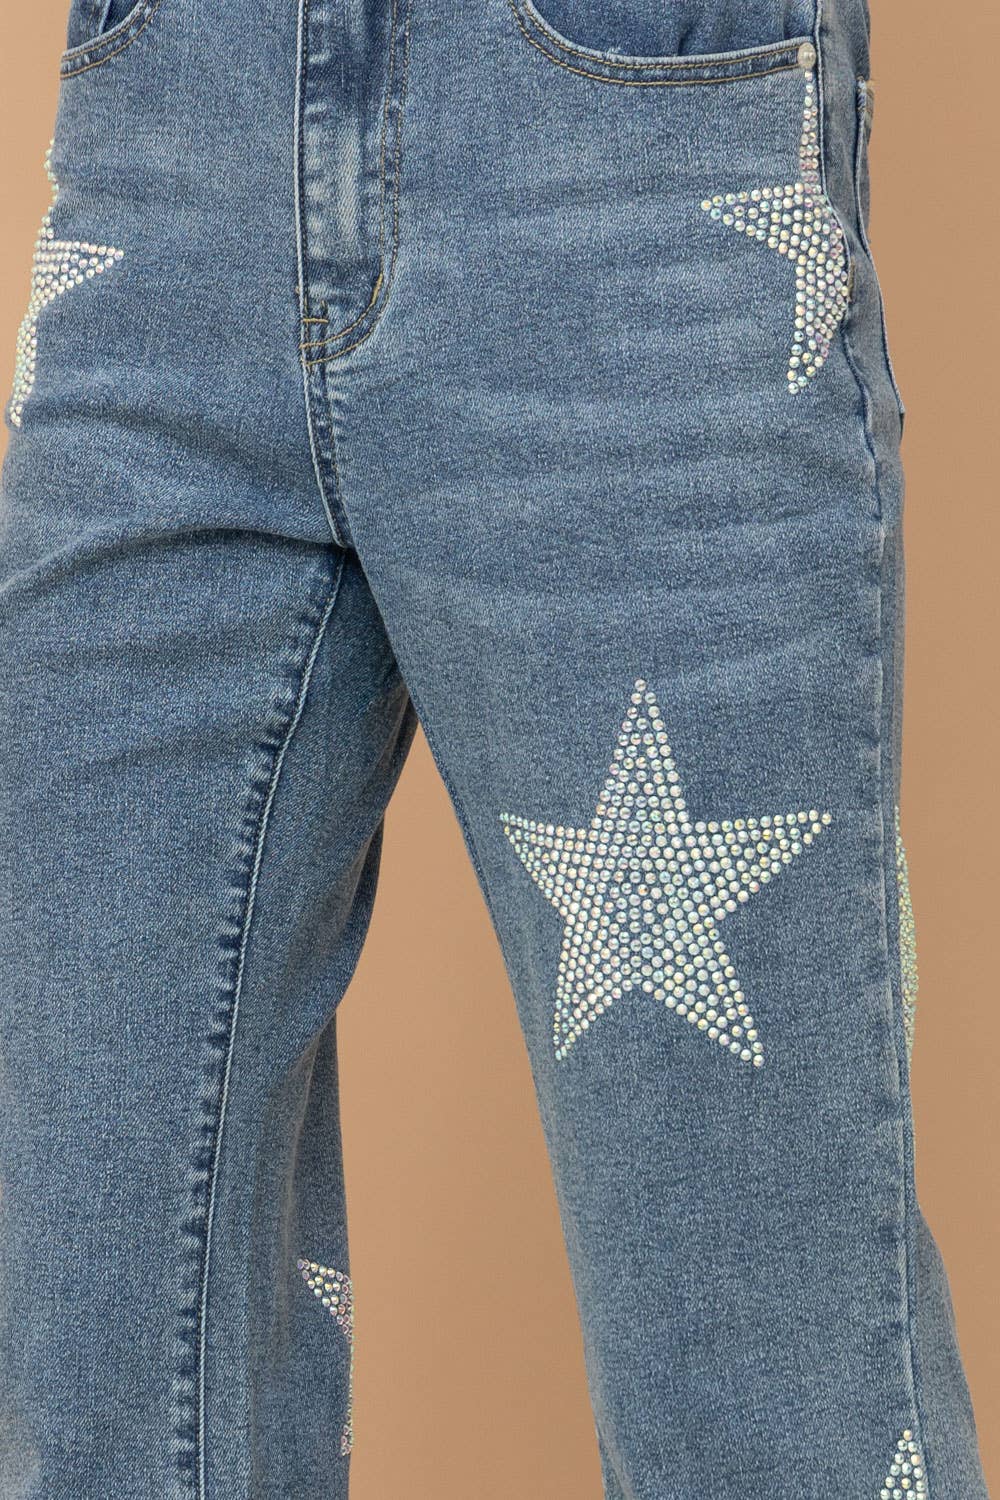 Rhinestone Star Studded Stretch Jeans - Forever Western Boutique